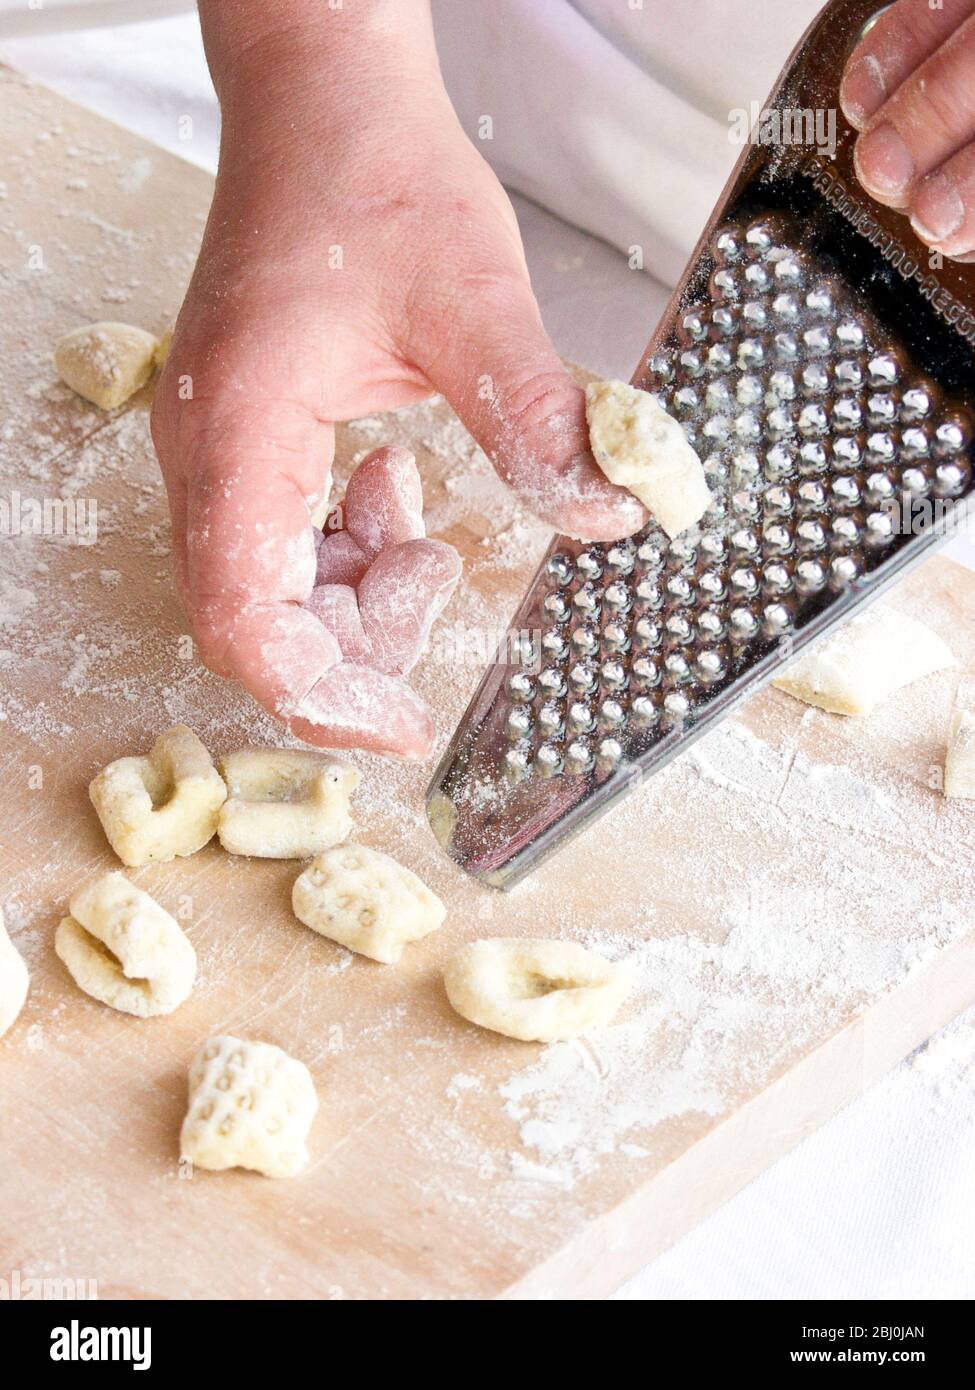 Rolling pieces of gnocchi dough on lemon zest grater, to shape them and give them texture. - Stock Photo